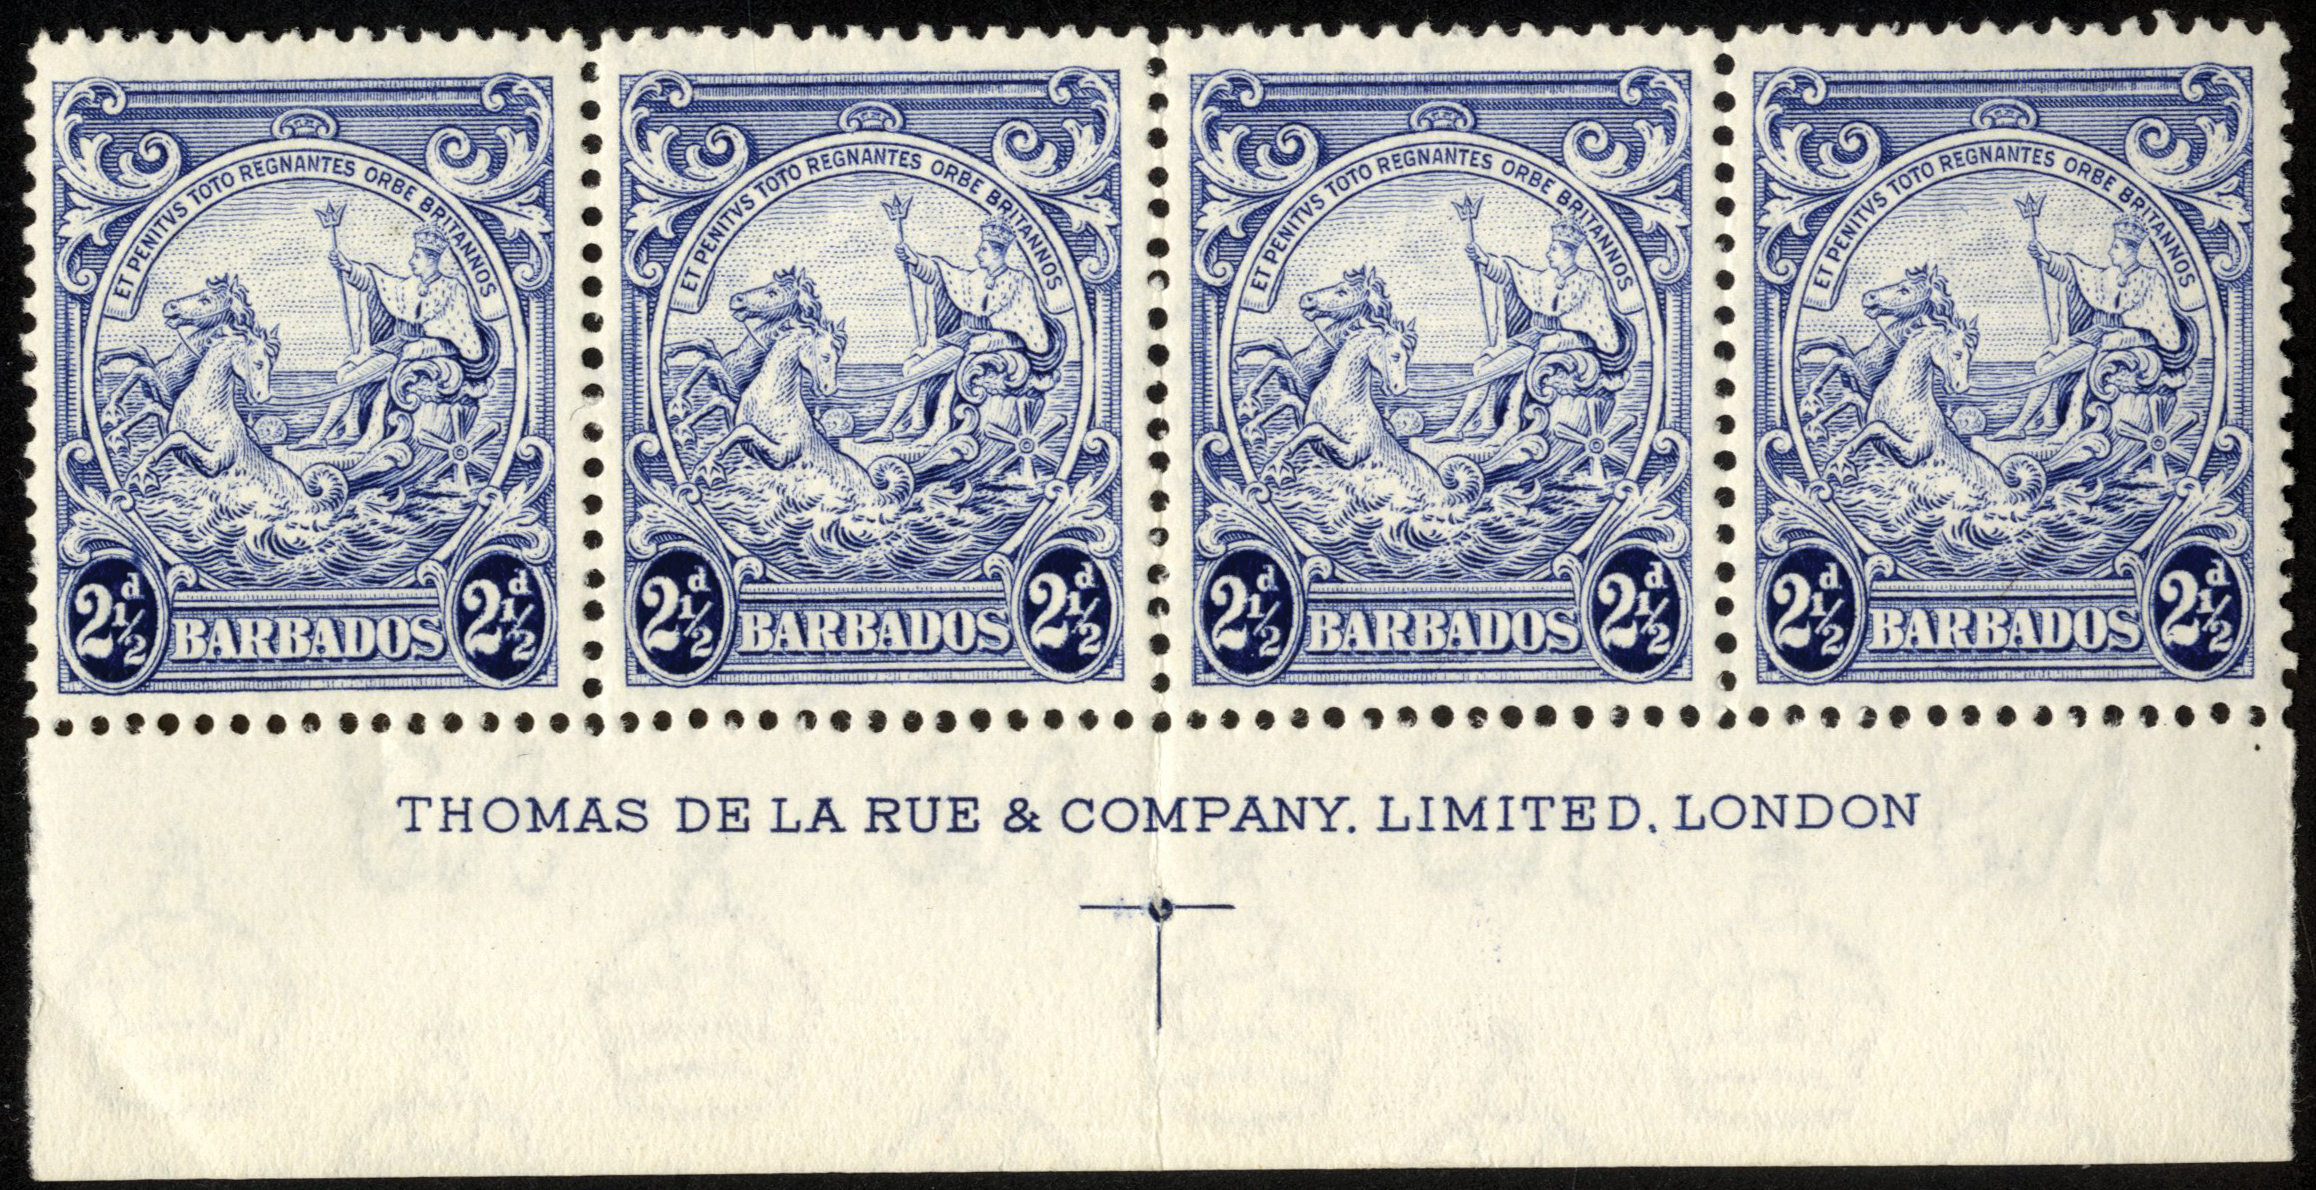 Barbados. 1938-47 2½d ultramarine horizontal mint strip of 4 with full imprint. R12/5 showing 'A' of